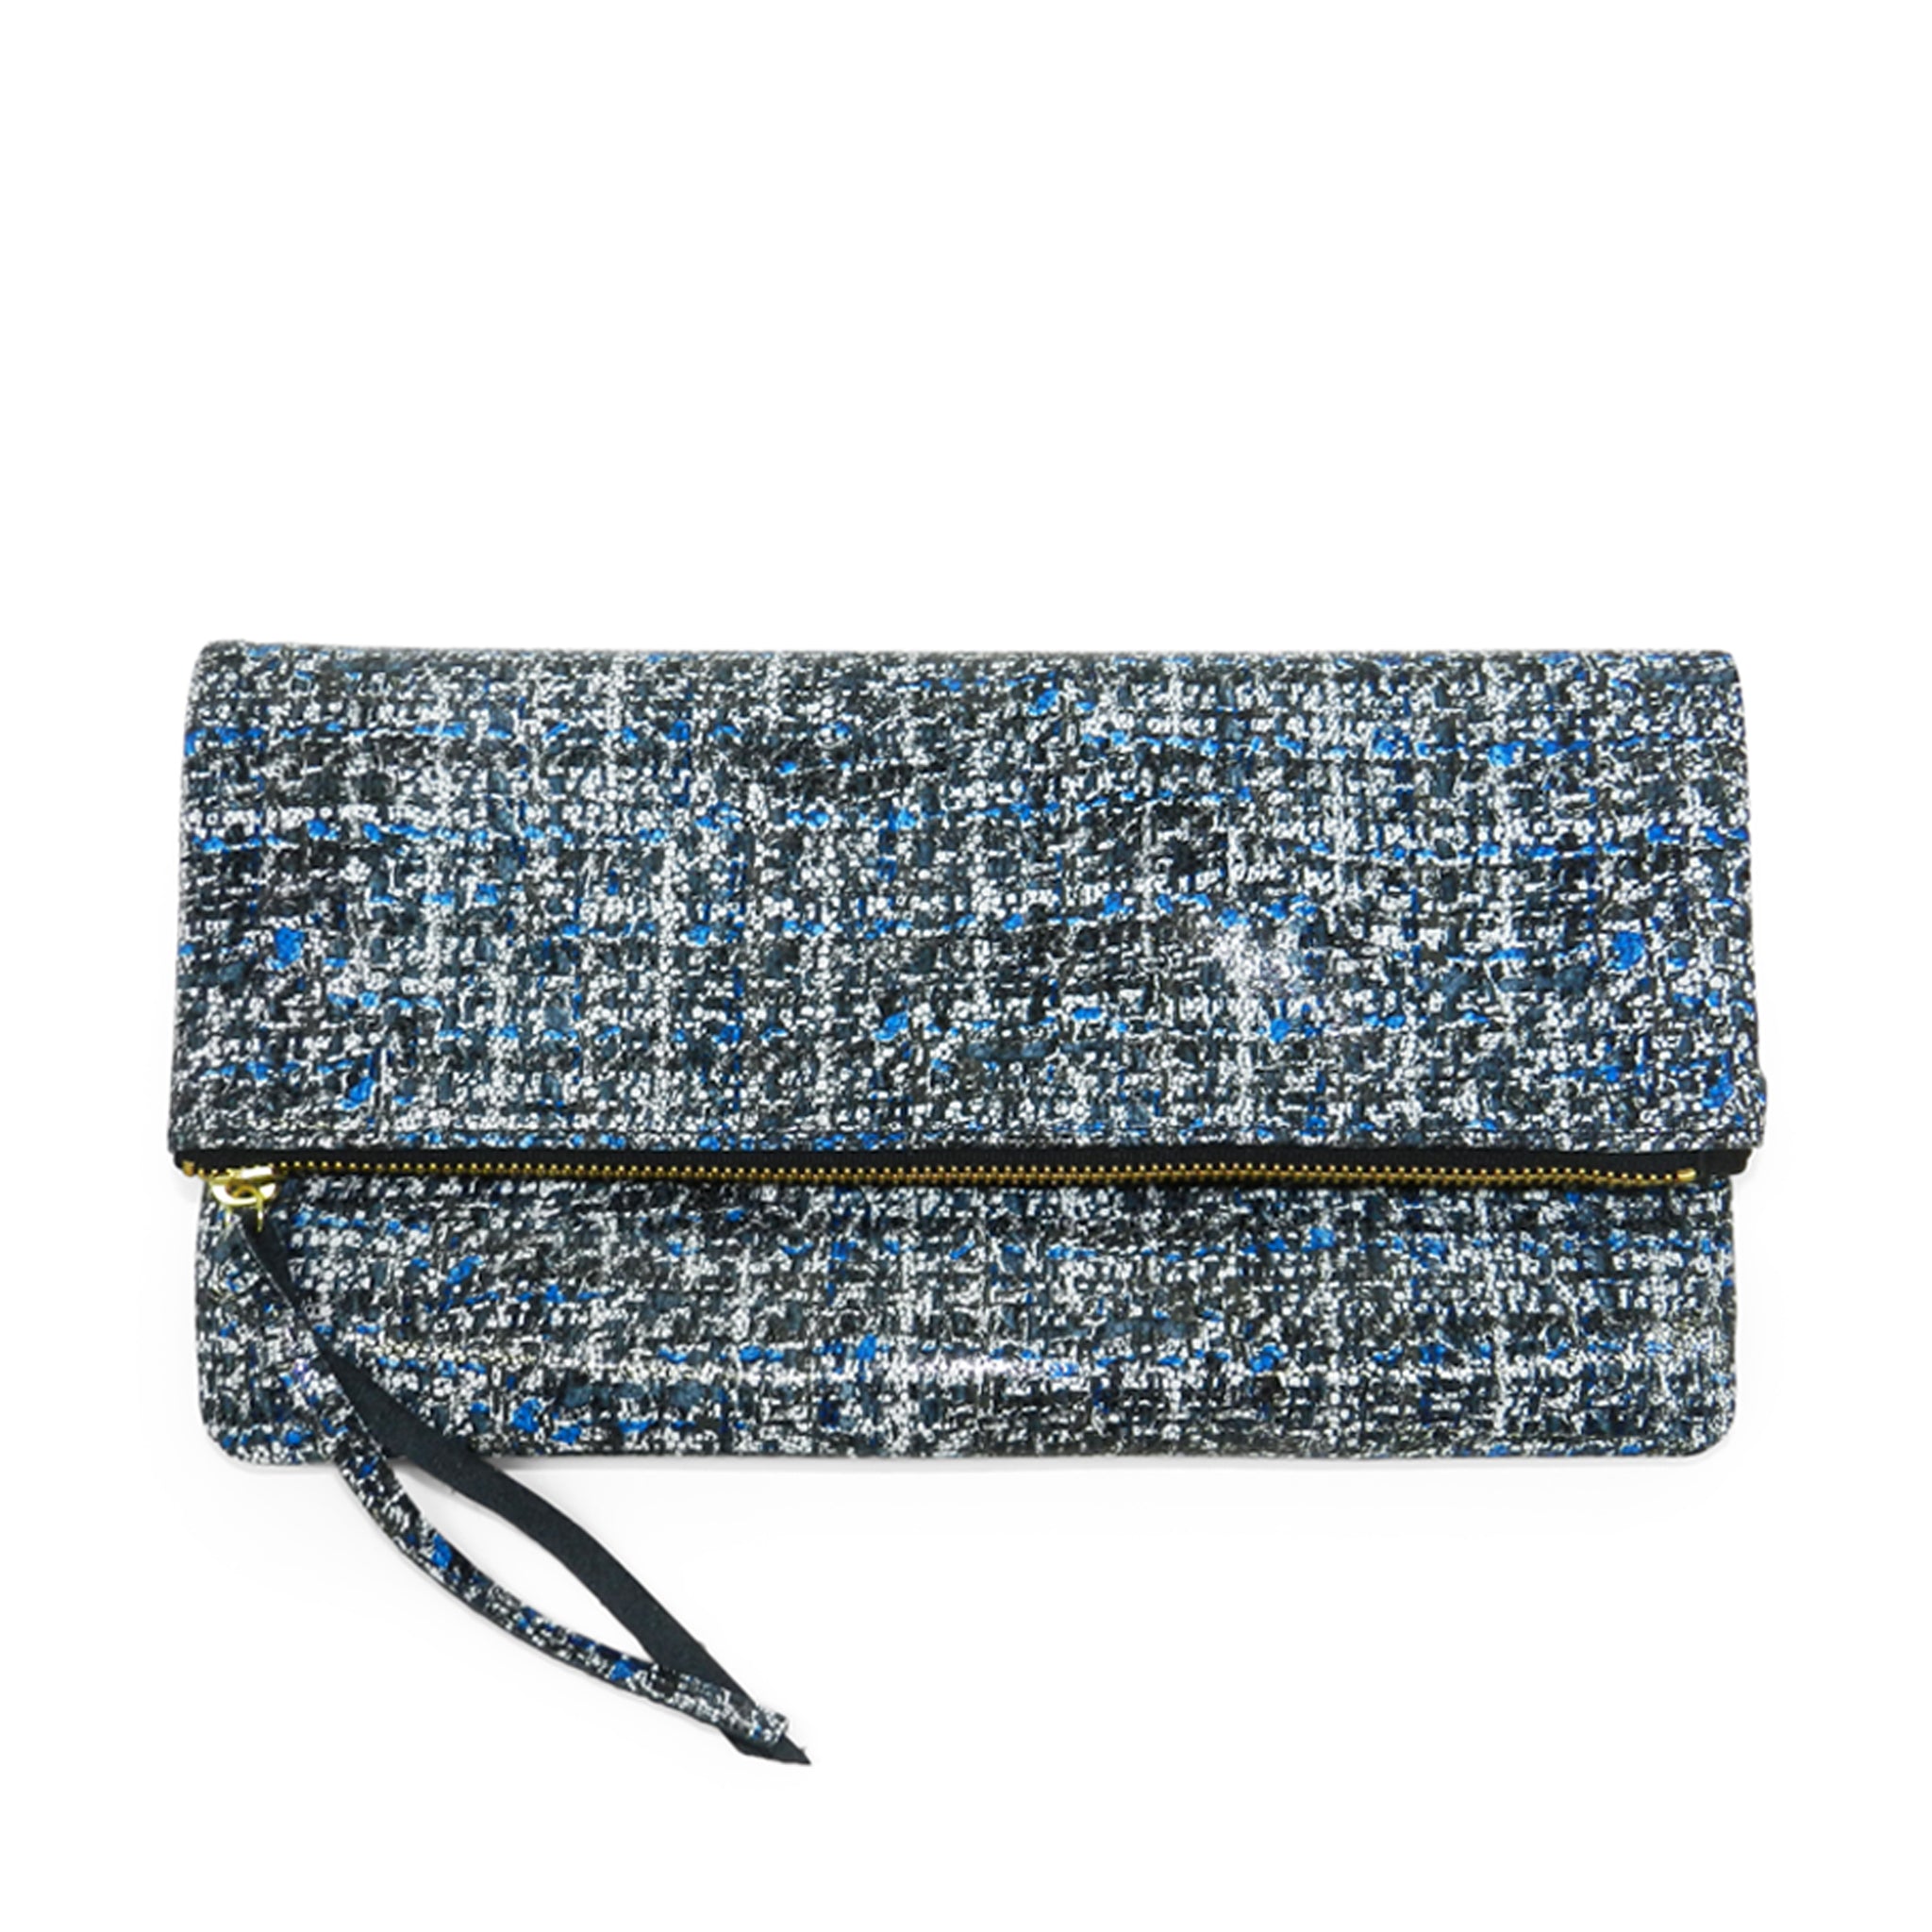 anastasia clutch in blue tweed leather